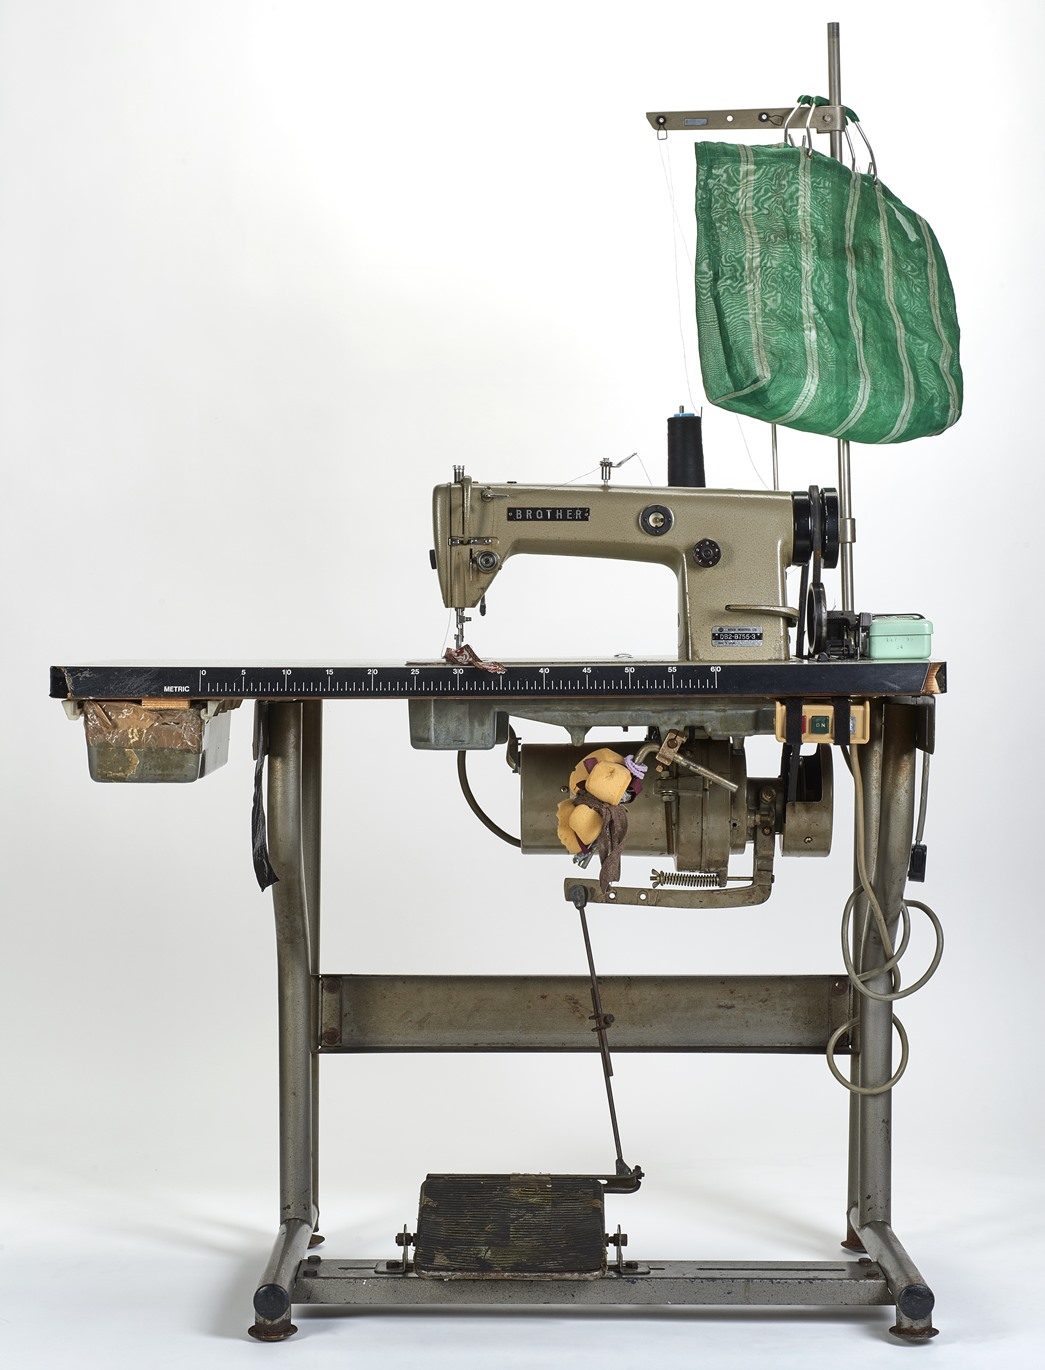 Anwara Begum’s Brother sewing machine
When Anwara Begum was not sewing for work, she was sewing as a pastime. This machine is a family heirloom. (ID no.: 2021.20/1)
